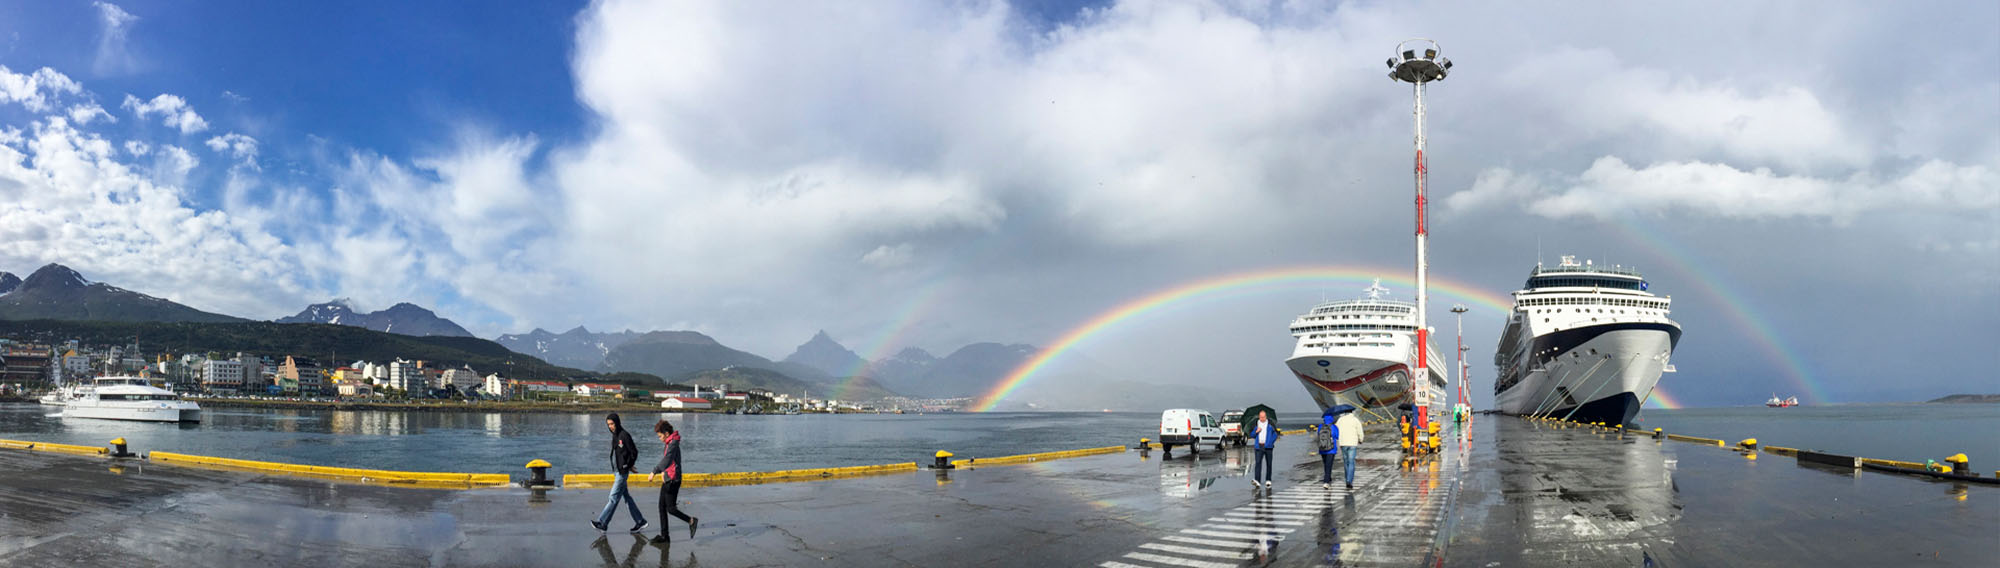 Two ships at a port with a double rainbow behind them.